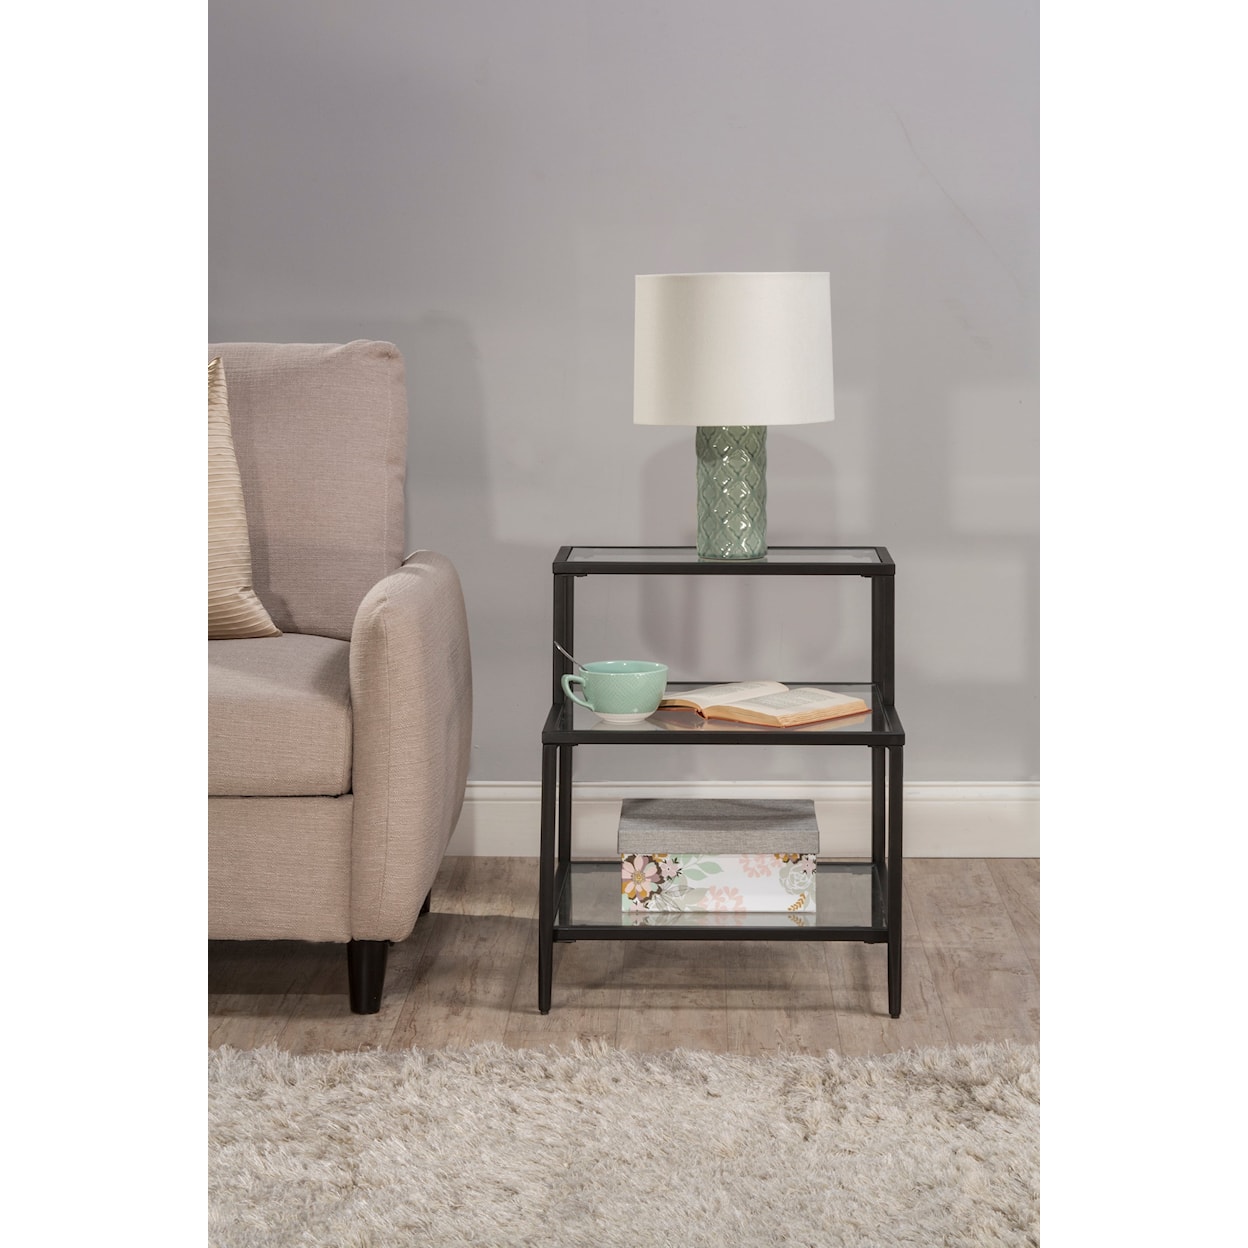 Hillsdale Harlan End Table